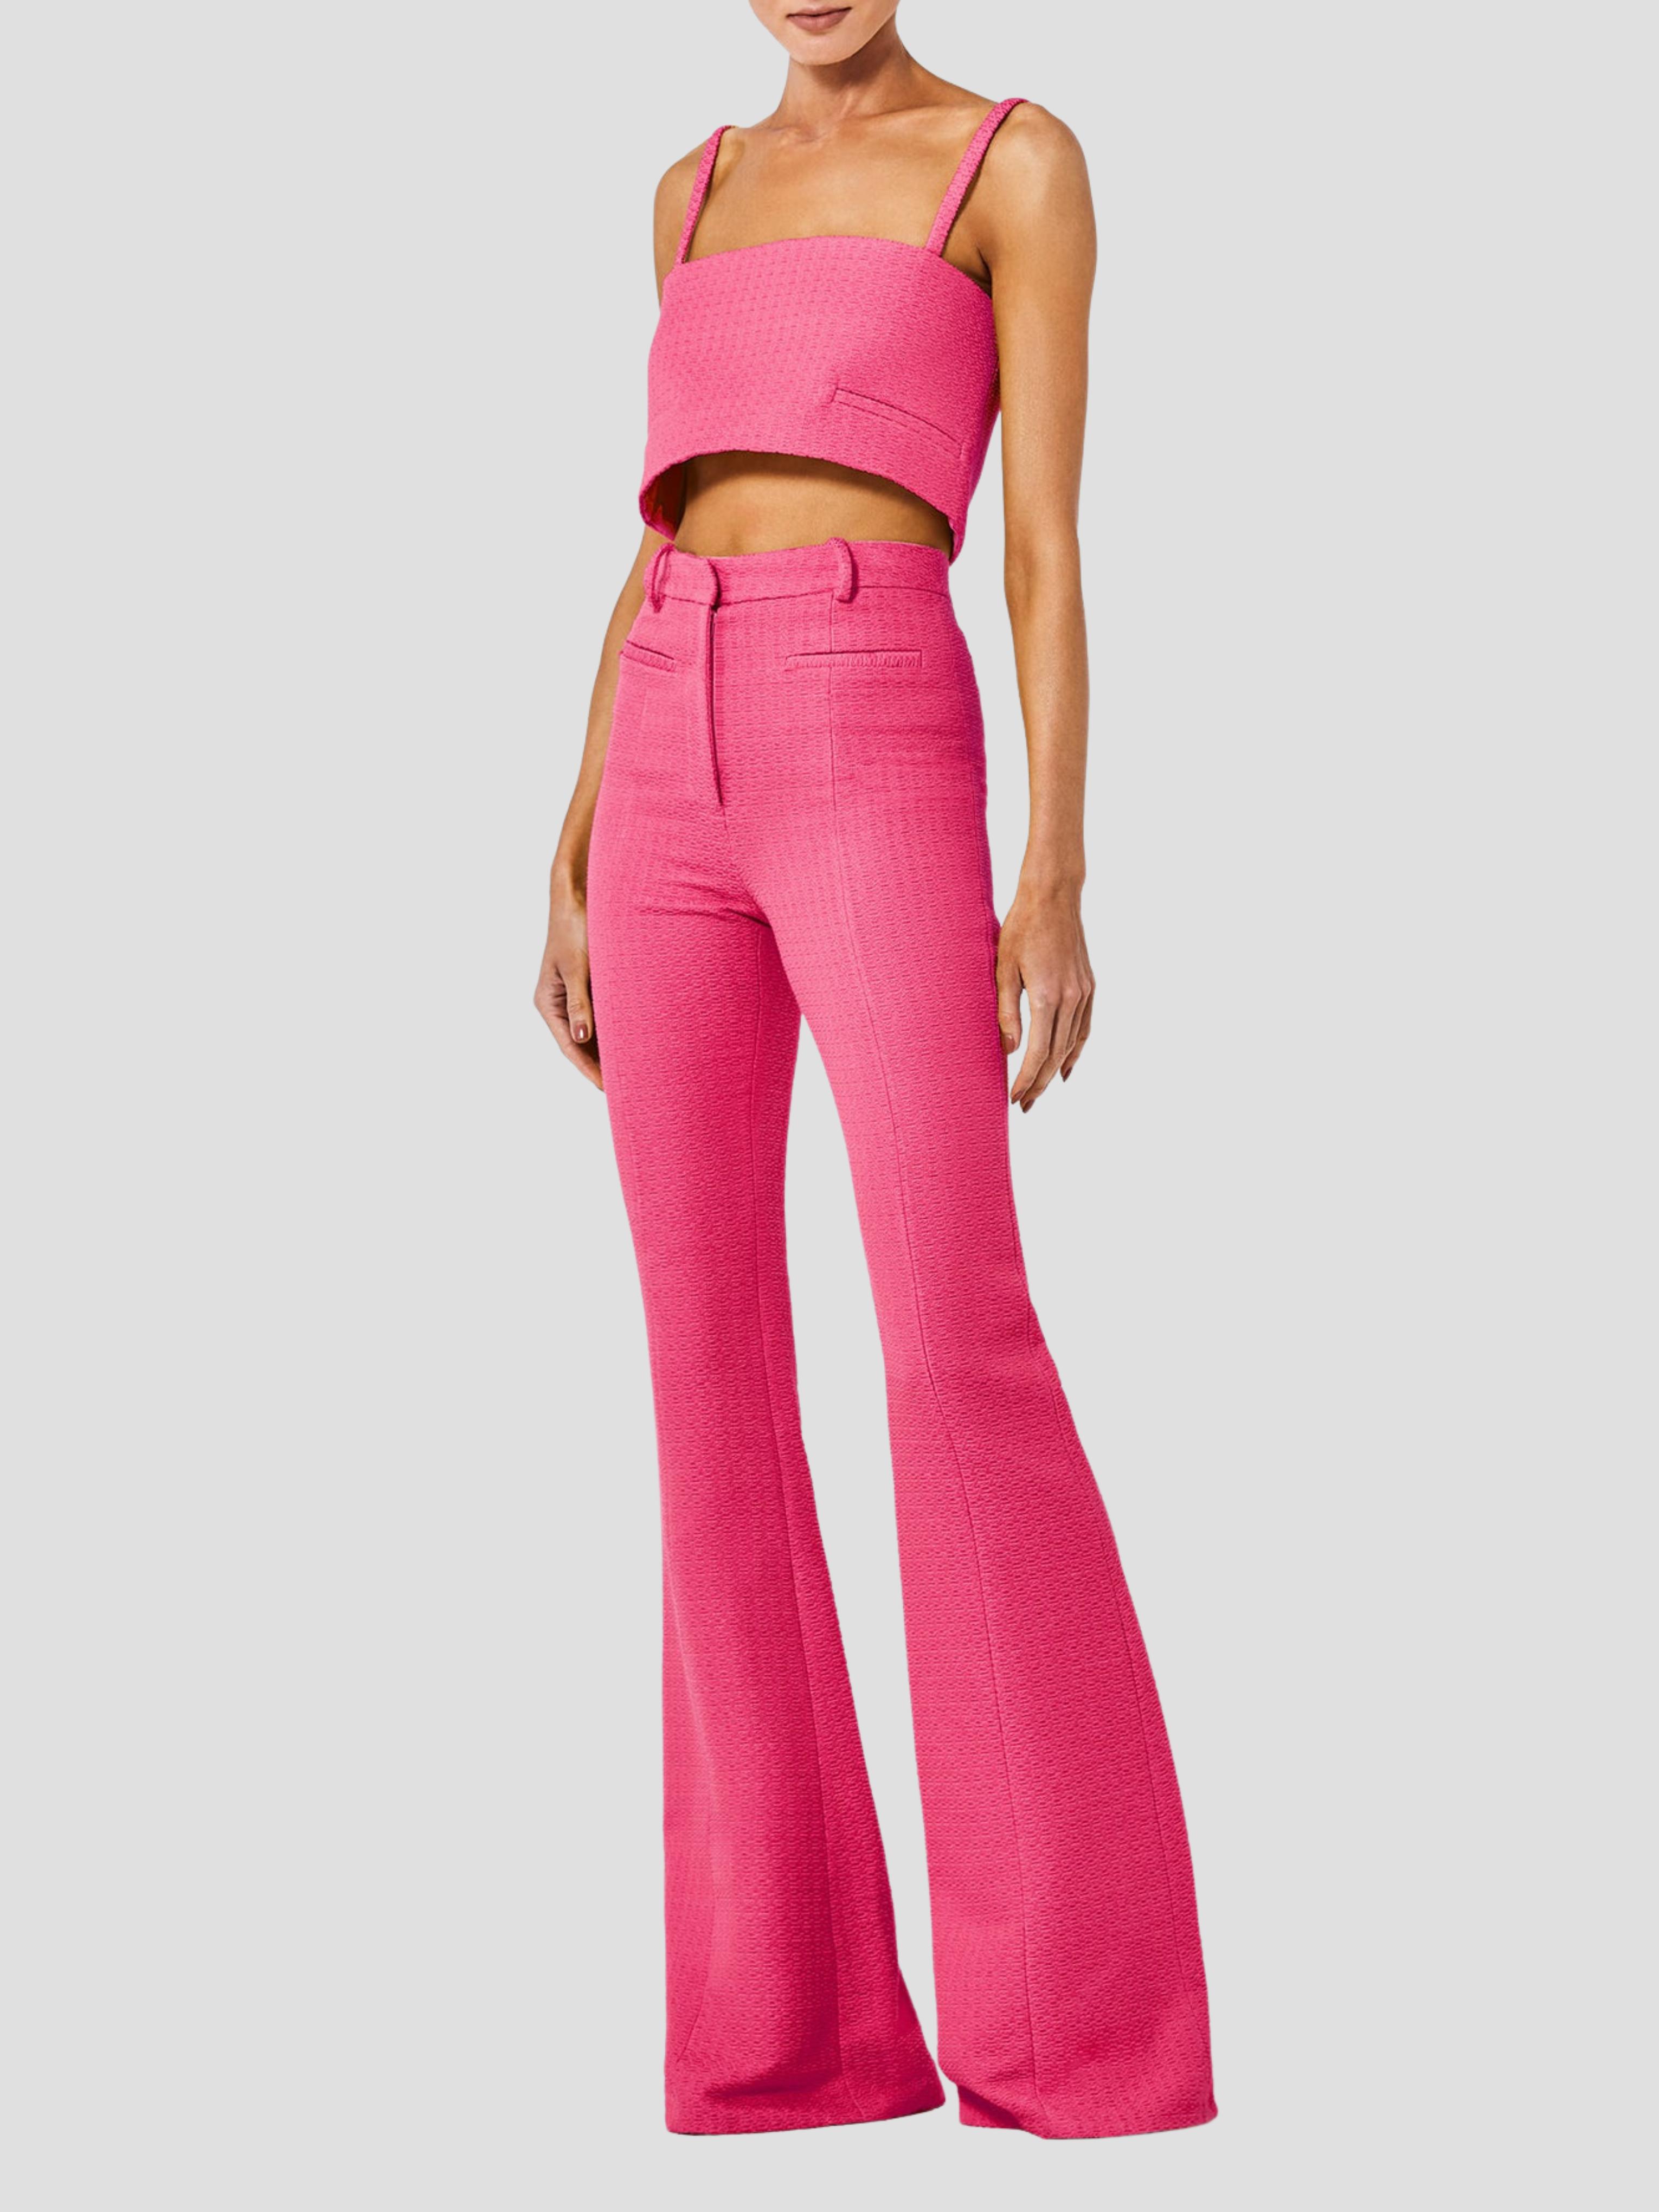 Alexis Lyla Fit And Flare Pant In Rose in Pink | Lyst